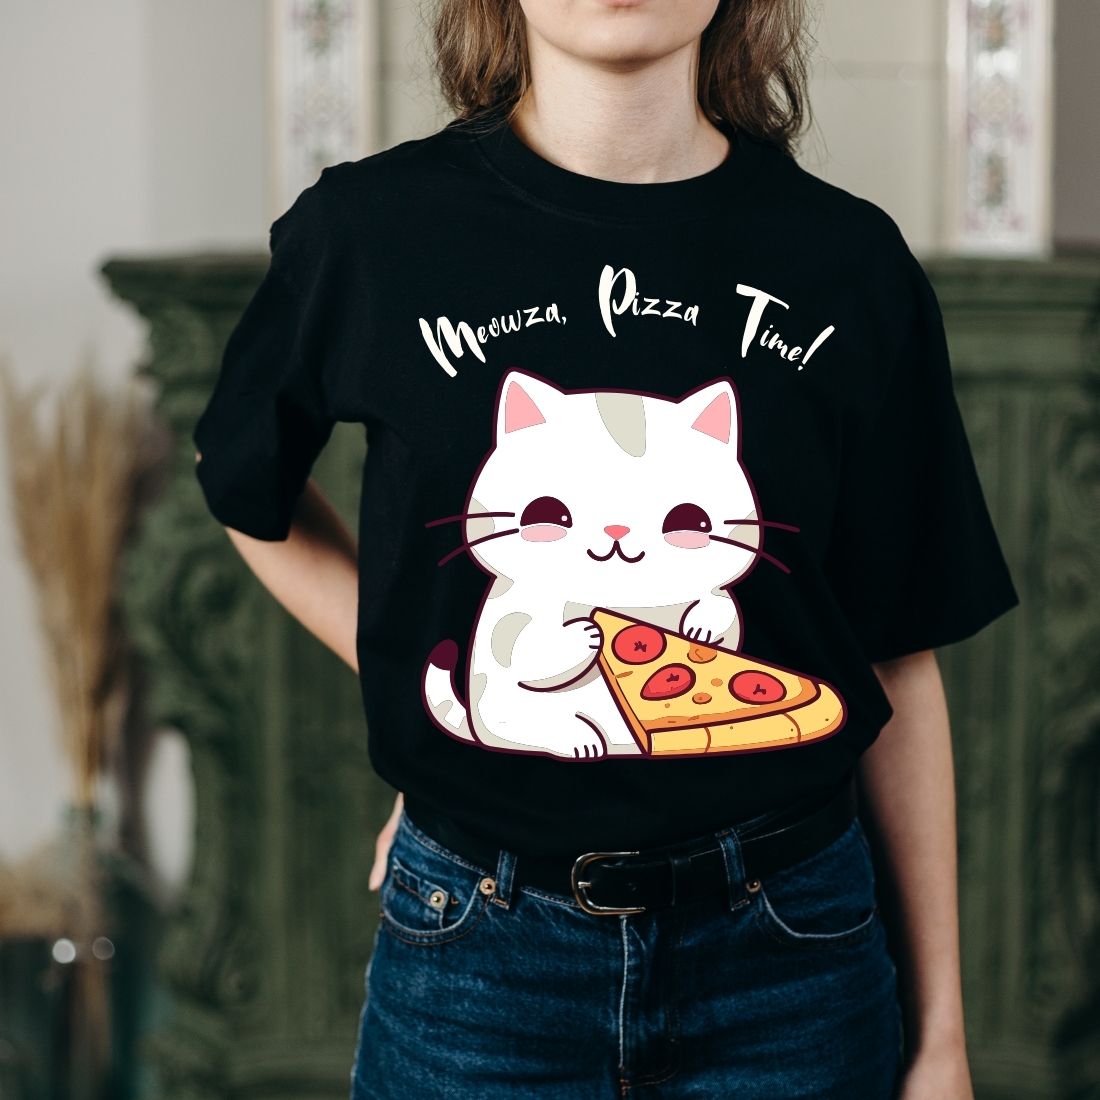 Meowza, Pizza Time! T-Shirt Design preview image.